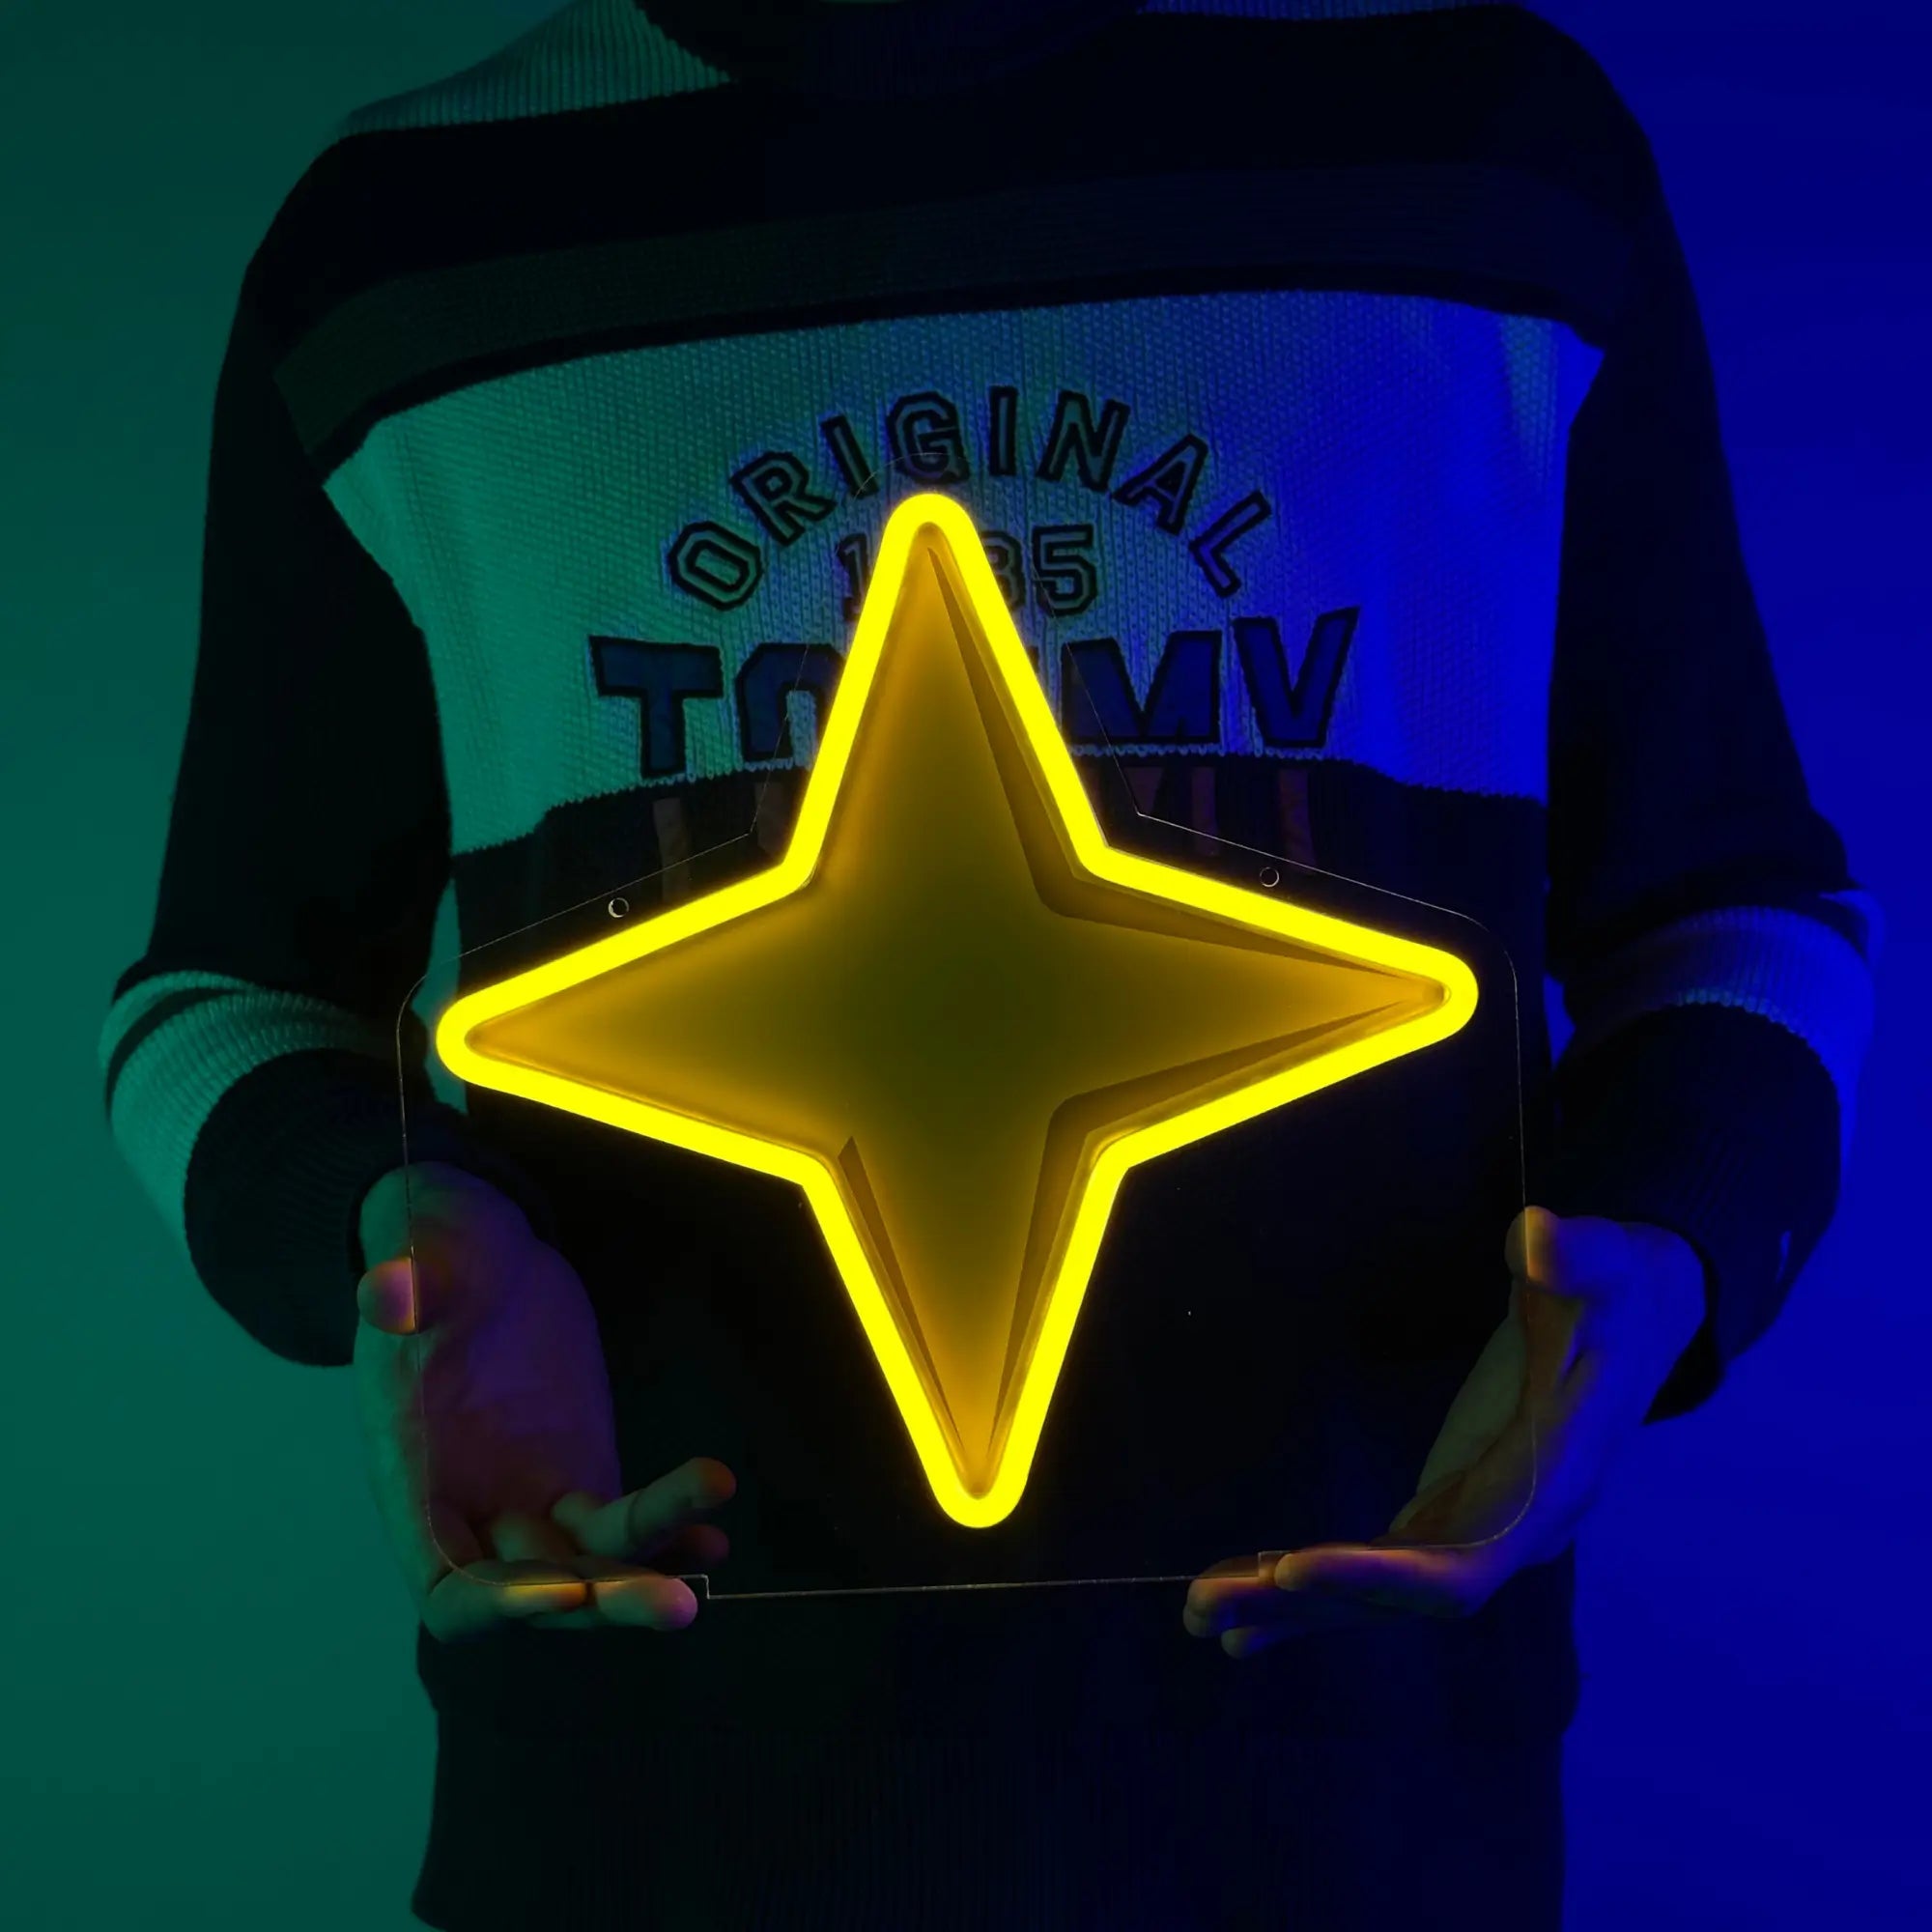 A man proudly holding a LED neon sign of the Saradomin God Symbol, an iconic emblem from Runescape.